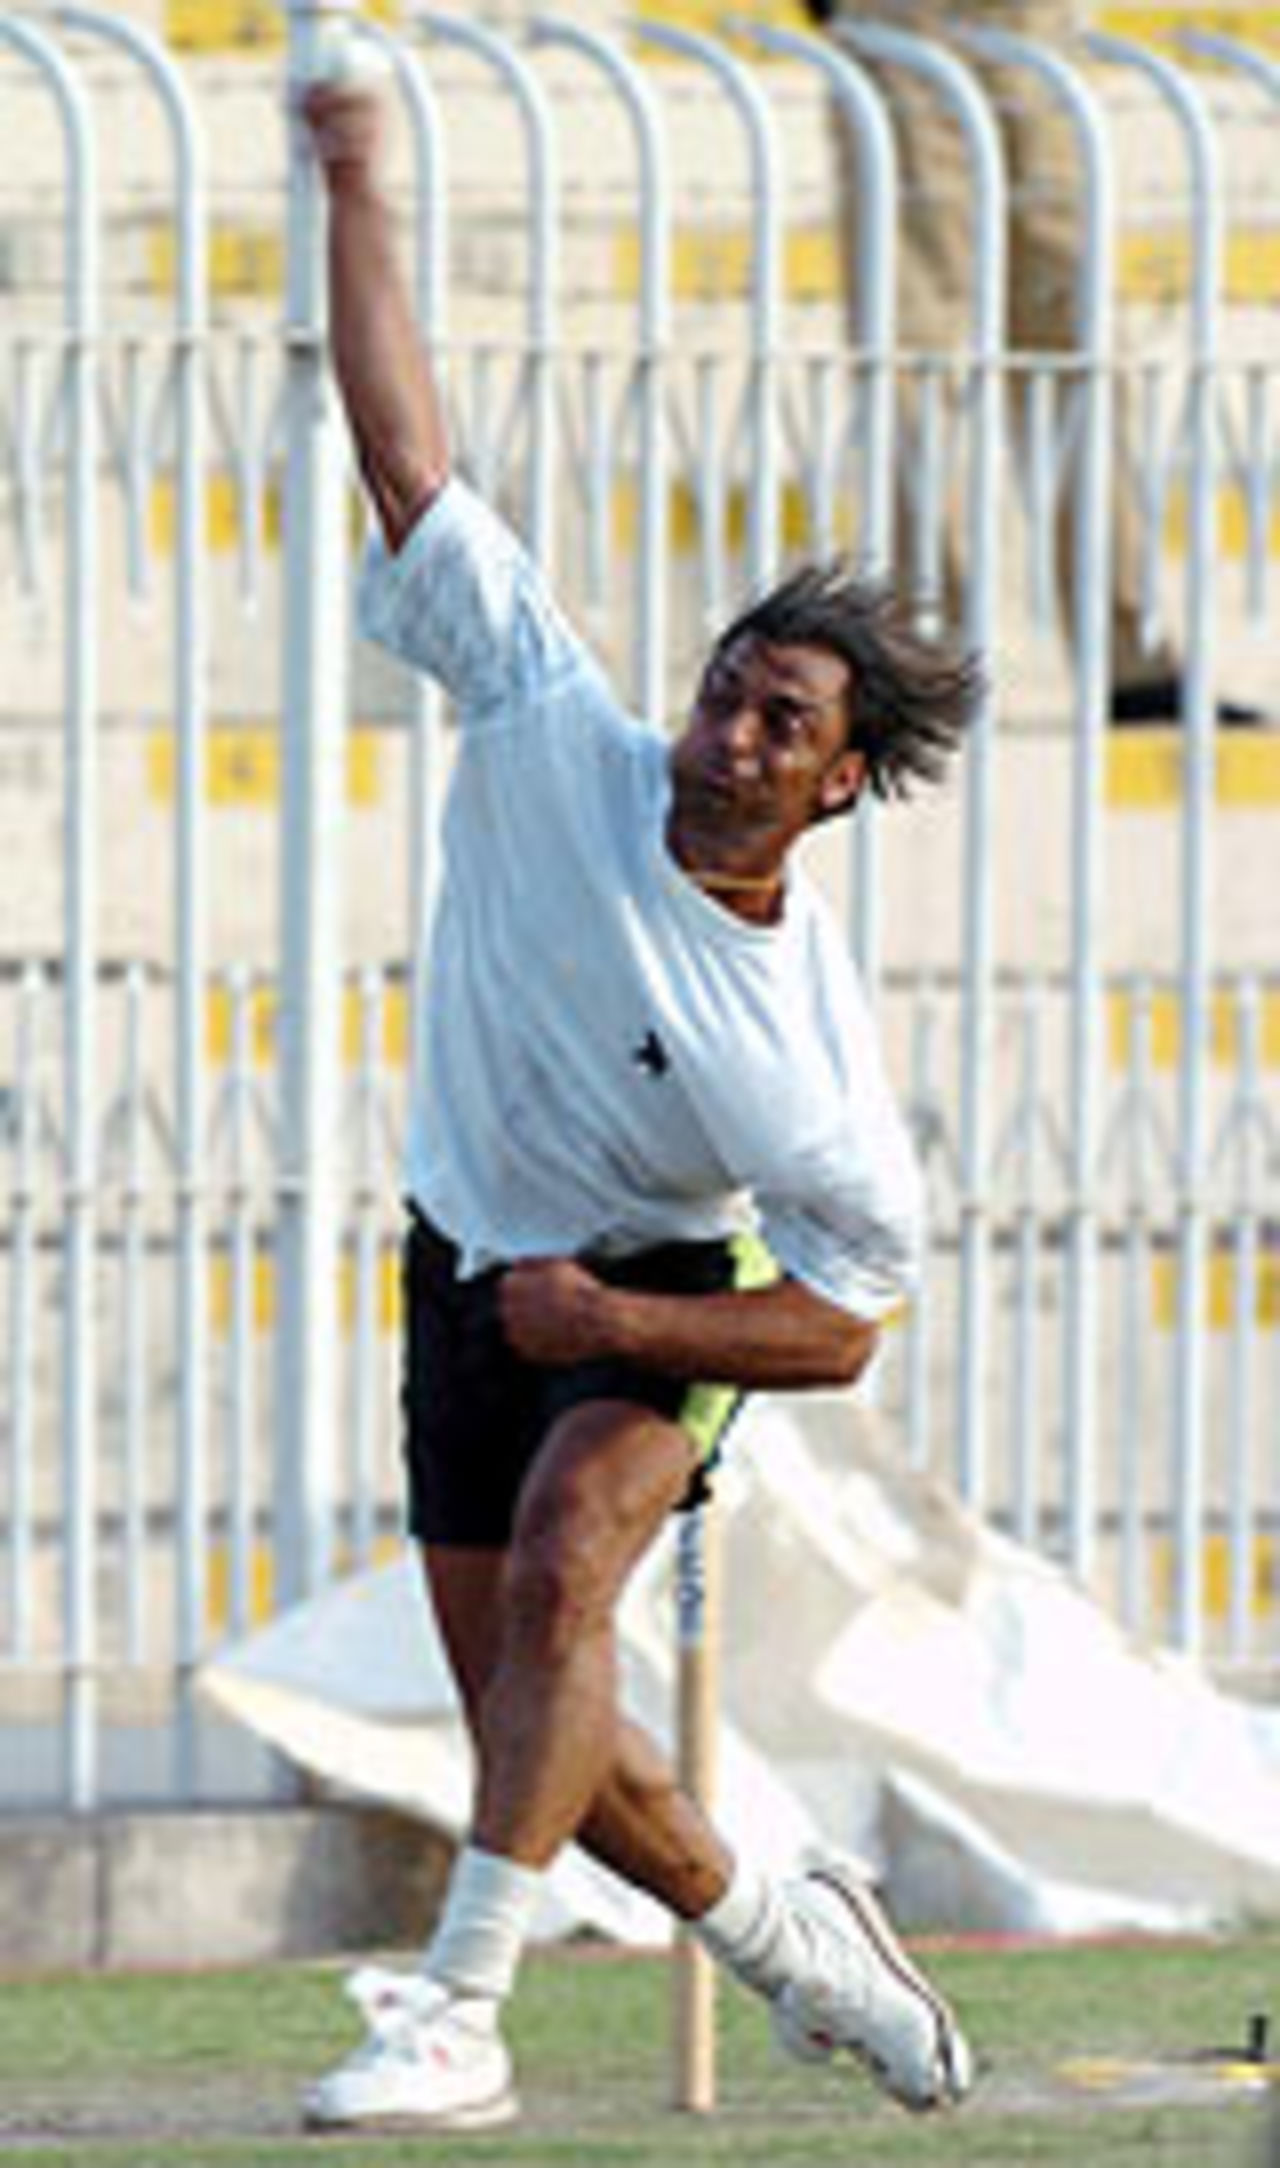 Shoaib Akhtar bowls in the nets, March 15, 2004